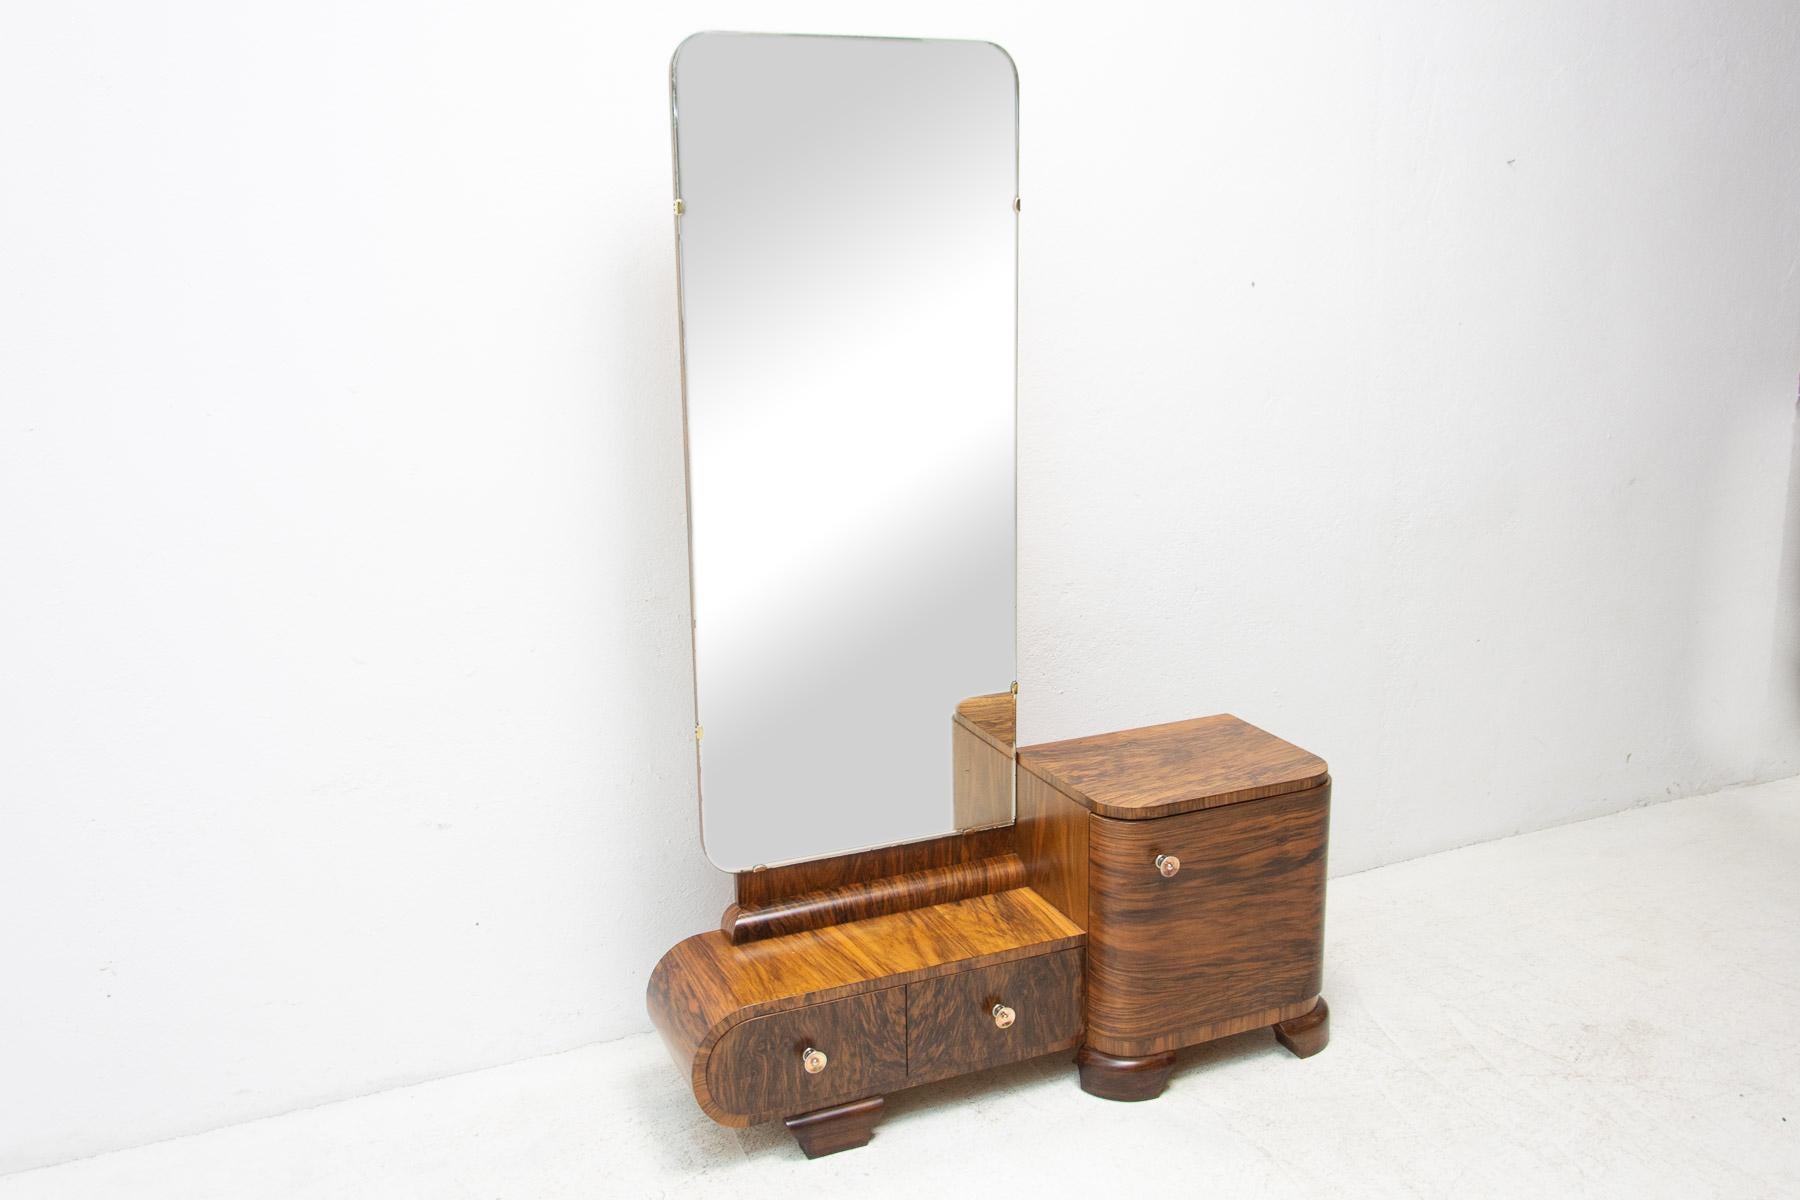 ART DECO Vanity/dressing table made in the former Czechoslovakia in the 1930’s. An outstanding timeless design. It´s made of walnut and glass. In excellent condition.

Measures: Height: 168 cm Width: 113 cm Depth: 37 cm.